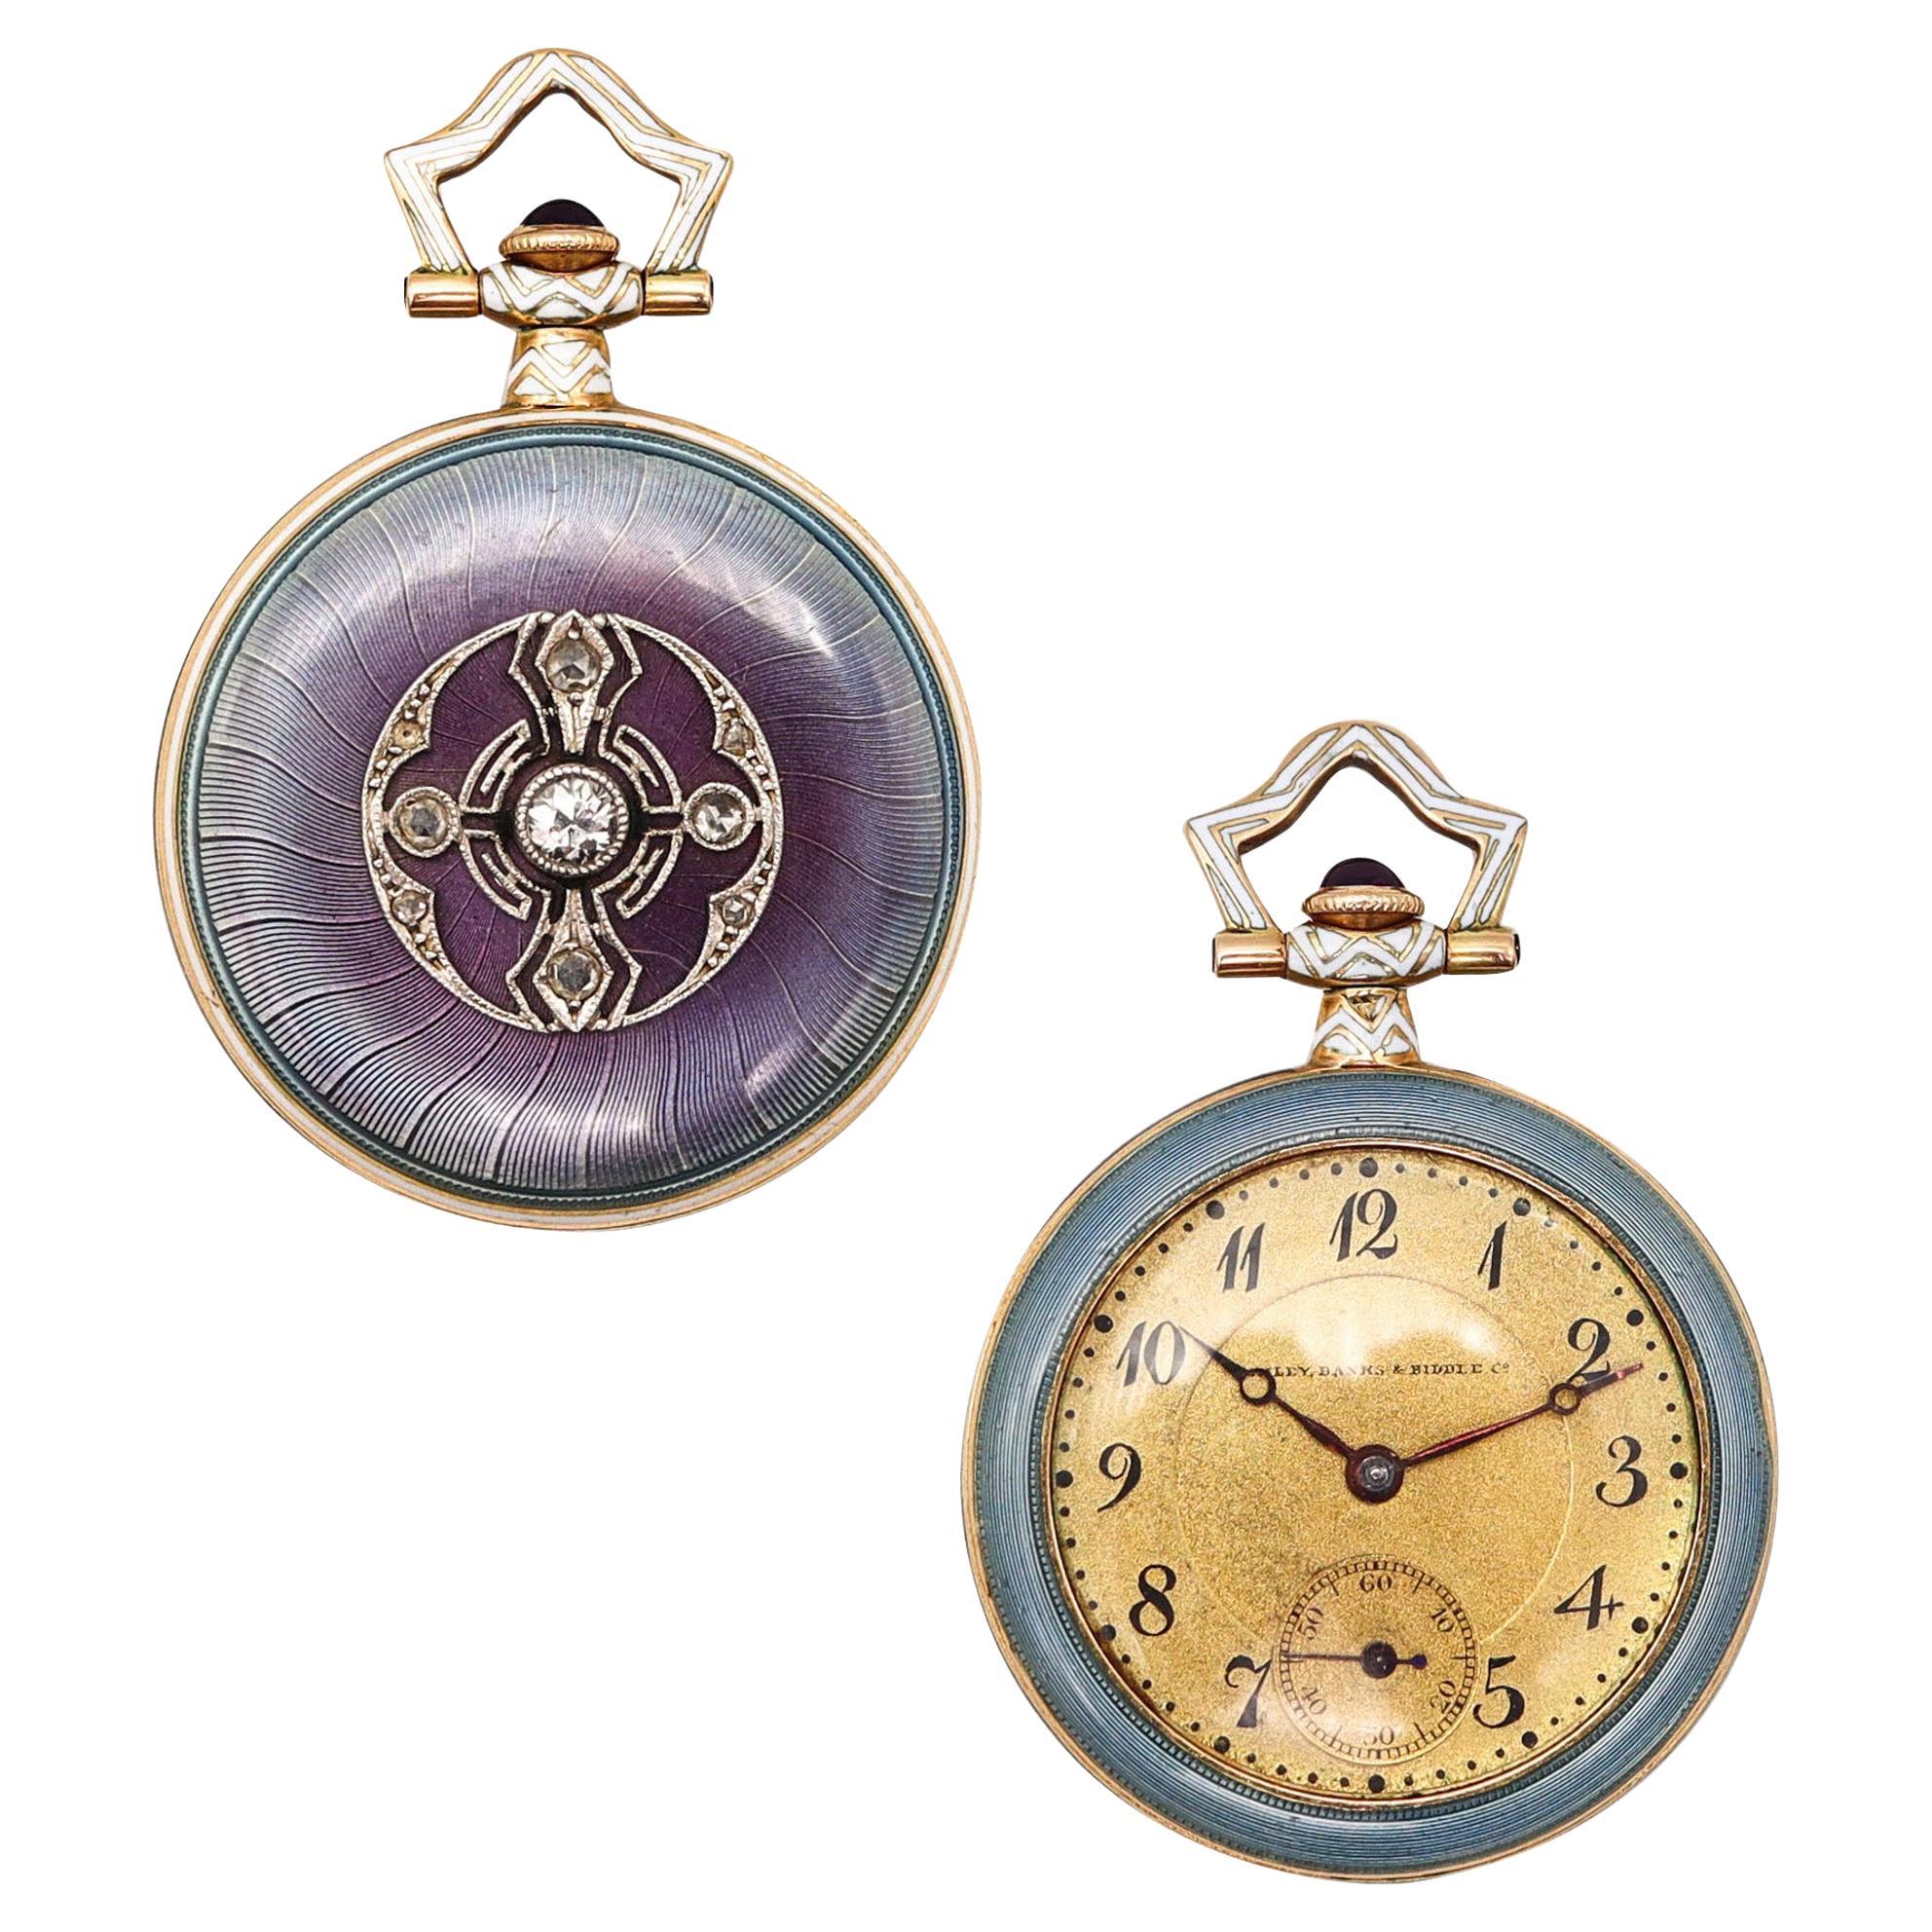 Bailey Banks & Biddle 1910 Edwardian Enamel Watch In 14Kt Gold With Diamonds For Sale